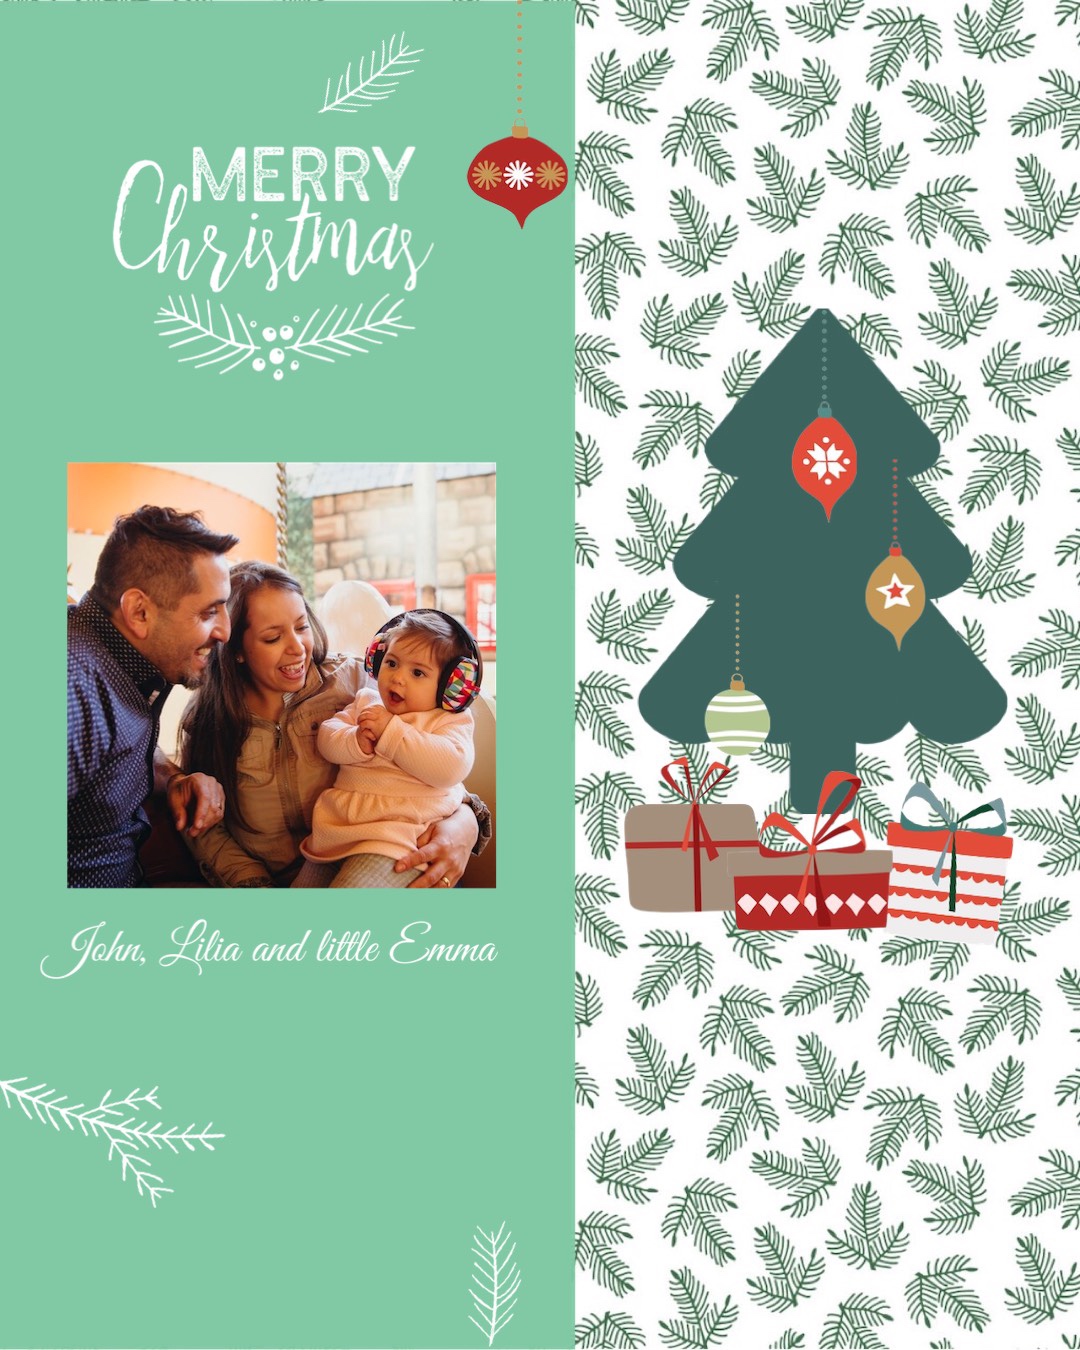 A Christmas Card With A Family And A Christmas Tree Merry Christmas Template